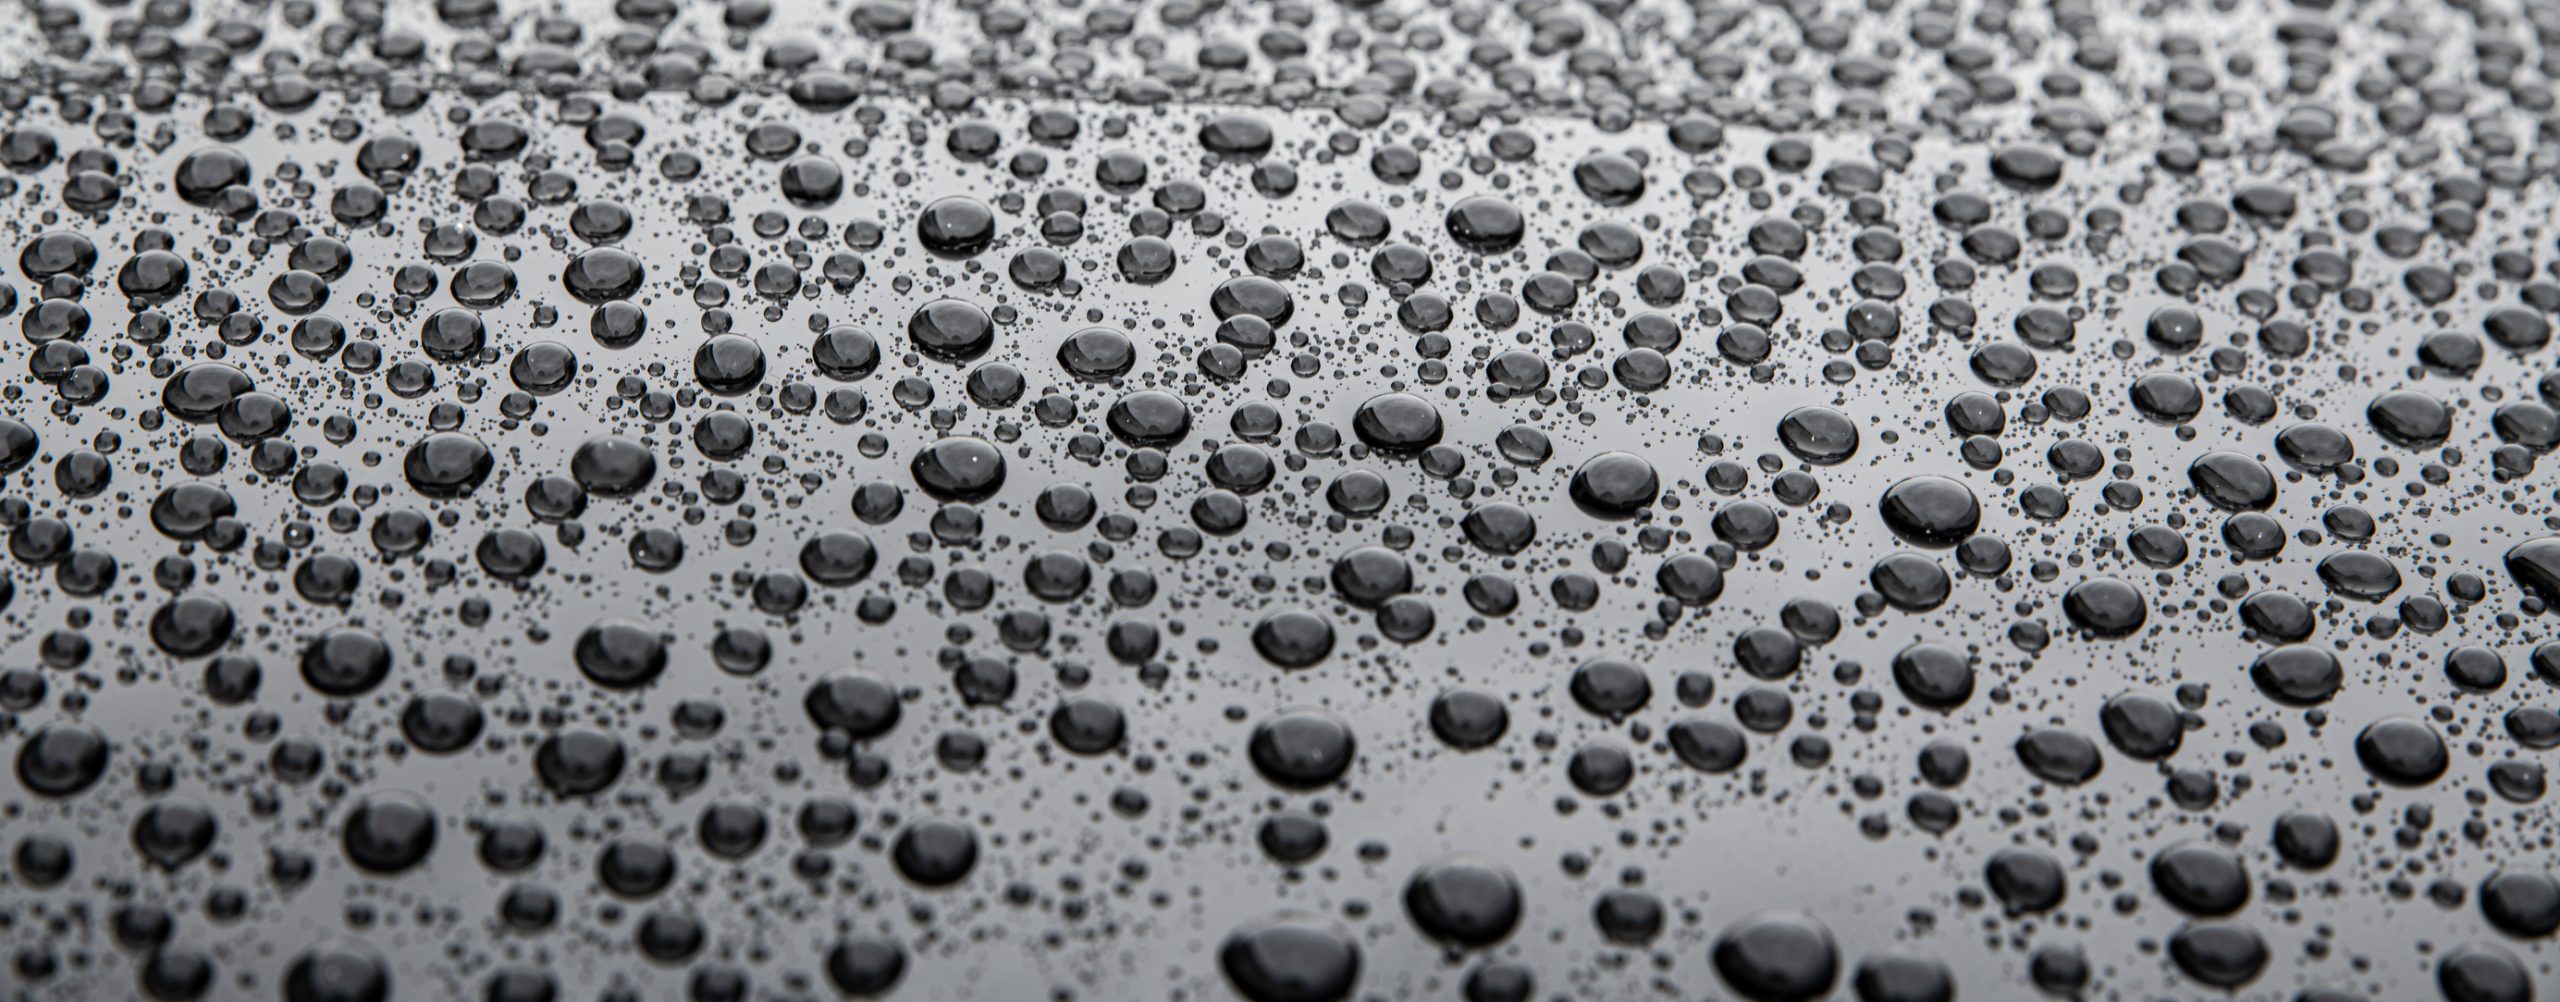 Water drops on car paint. Hydrophobic water effect on car body due to ceramic coating